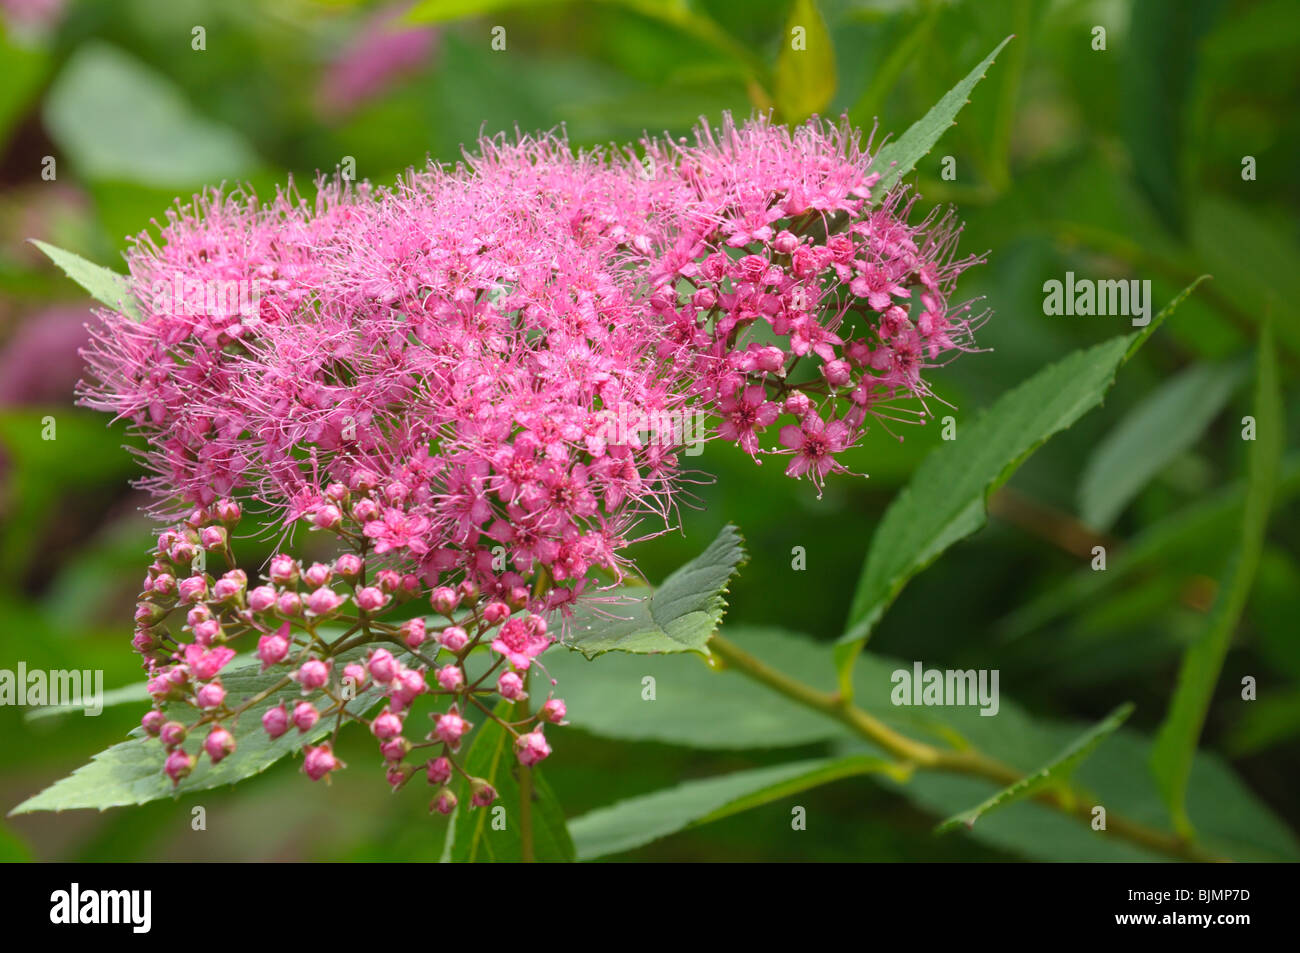 The close up view of the inflorescence of small red flowers Stock Photo